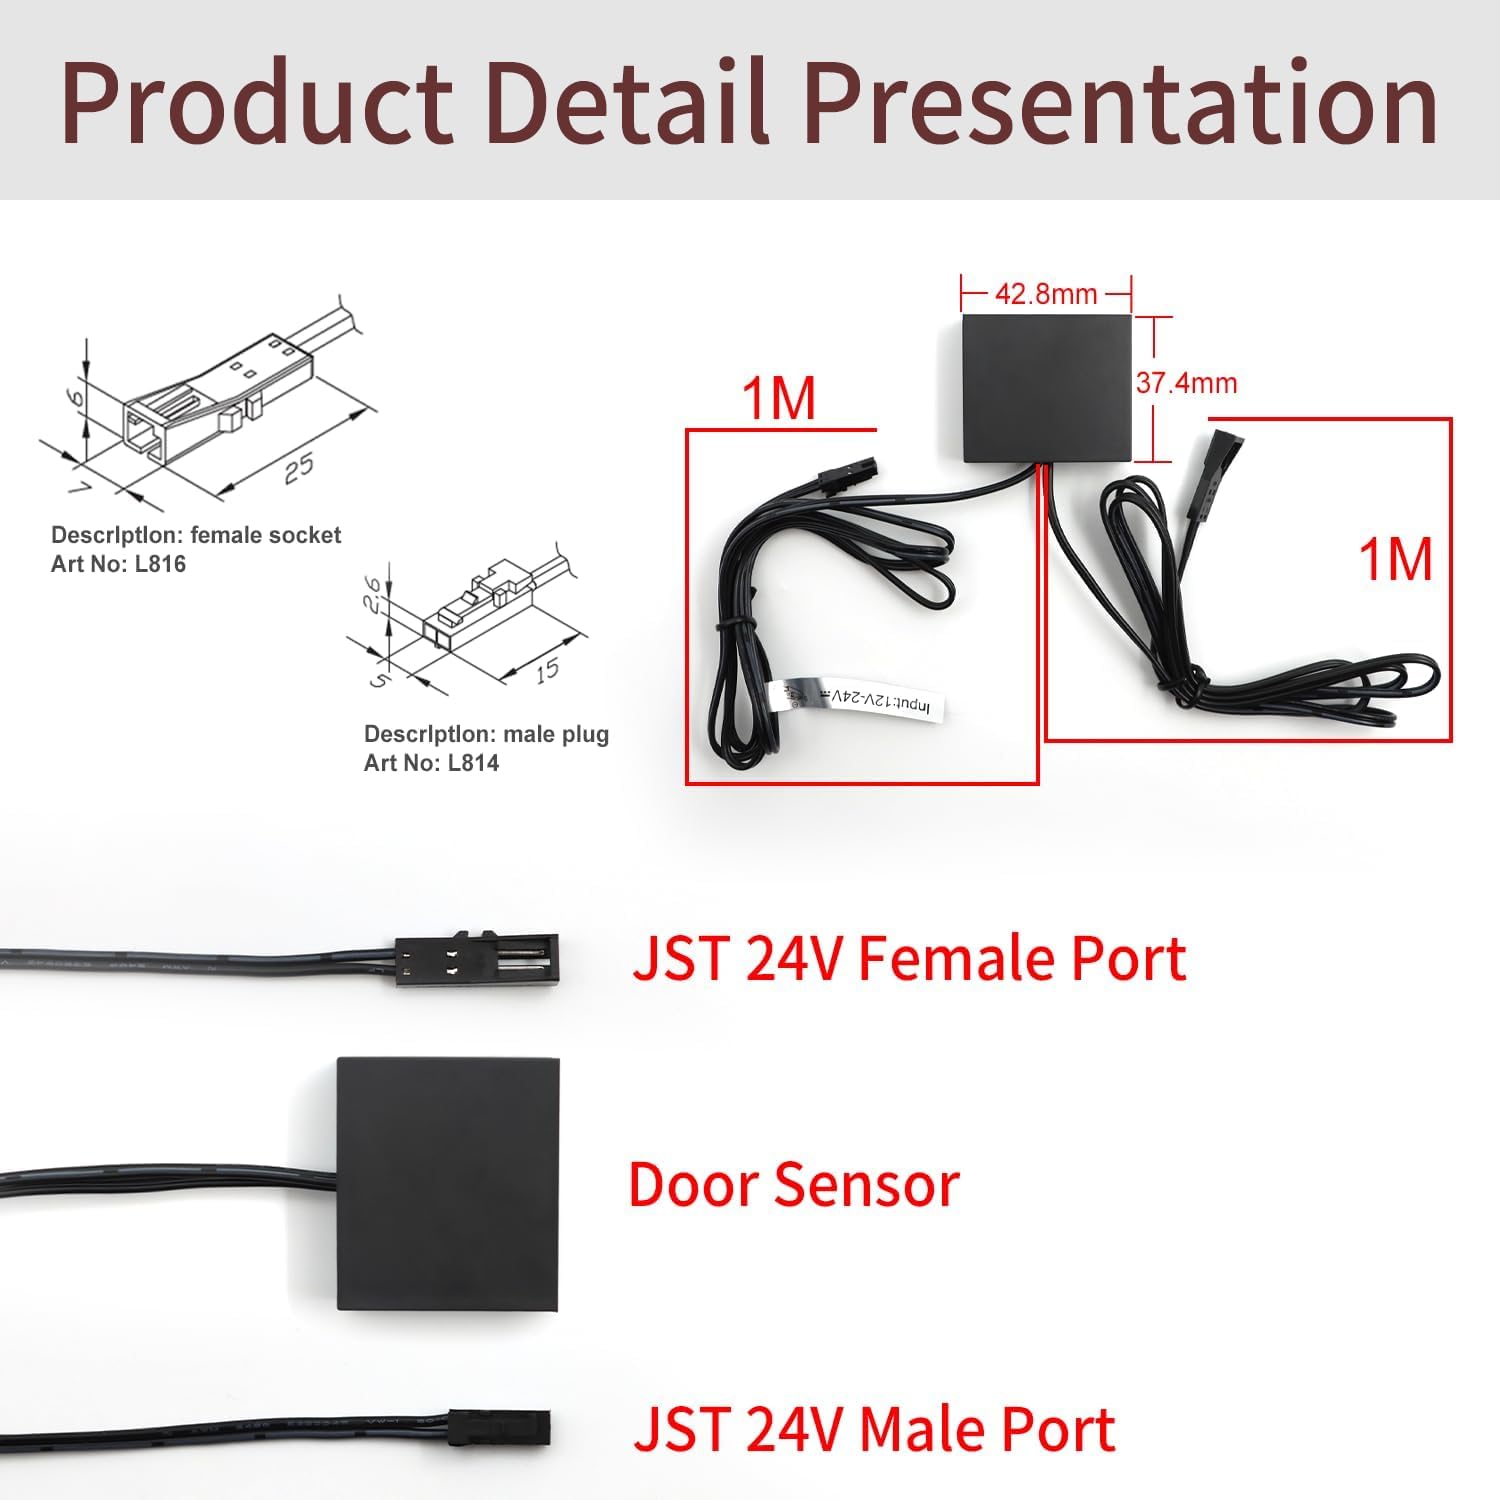 Send inquiry for 12V LED IR Door Sensor Switch 30W Smart Home Light Switch with 2-60mm Sensing Distance for Closet, Cabinet to high quality LED IR Door Sensor Switch supplier. Wholesale Smart Home Light Switch directly from China LED IR Door Sensor Switch manufacturers/exporters. Get a factory sale price list and become a distributor/agent-vstled.com.